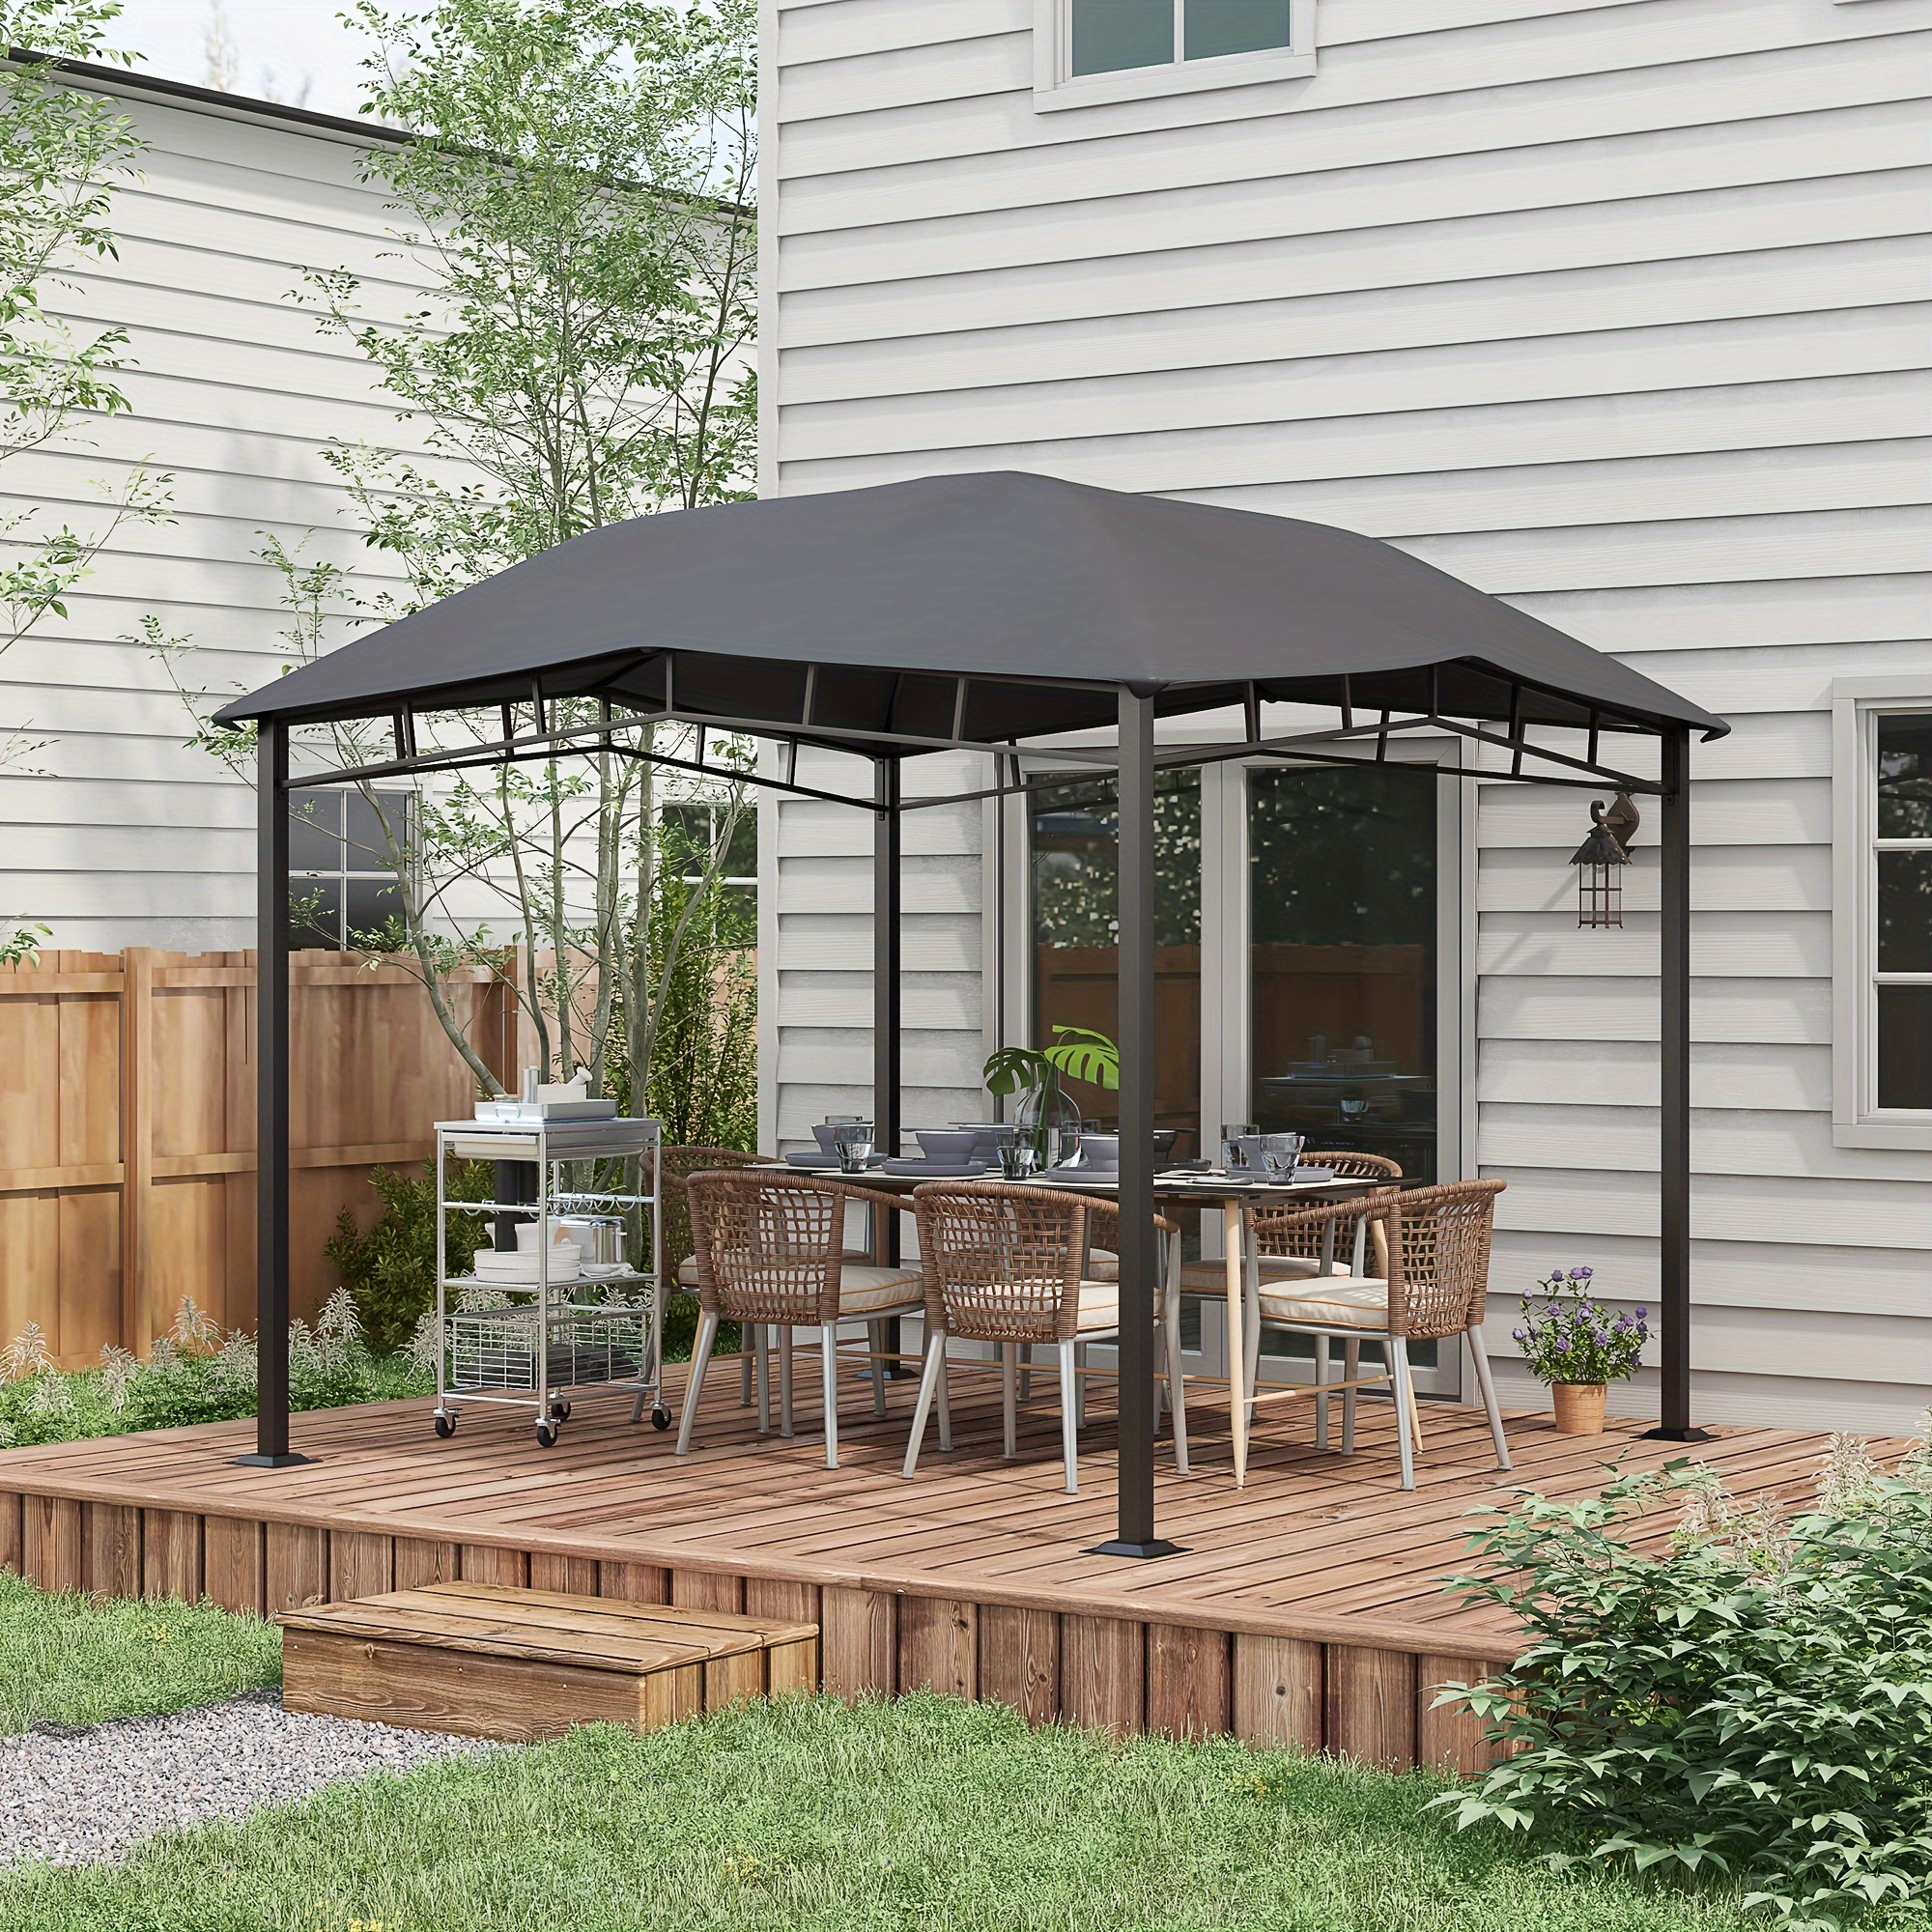 

Outsunny 10' X 10' Soft Top Patio Gazebo Outdoor Canopy With Unique Geometric Design Roof, All-weather Steel Frame, Gray